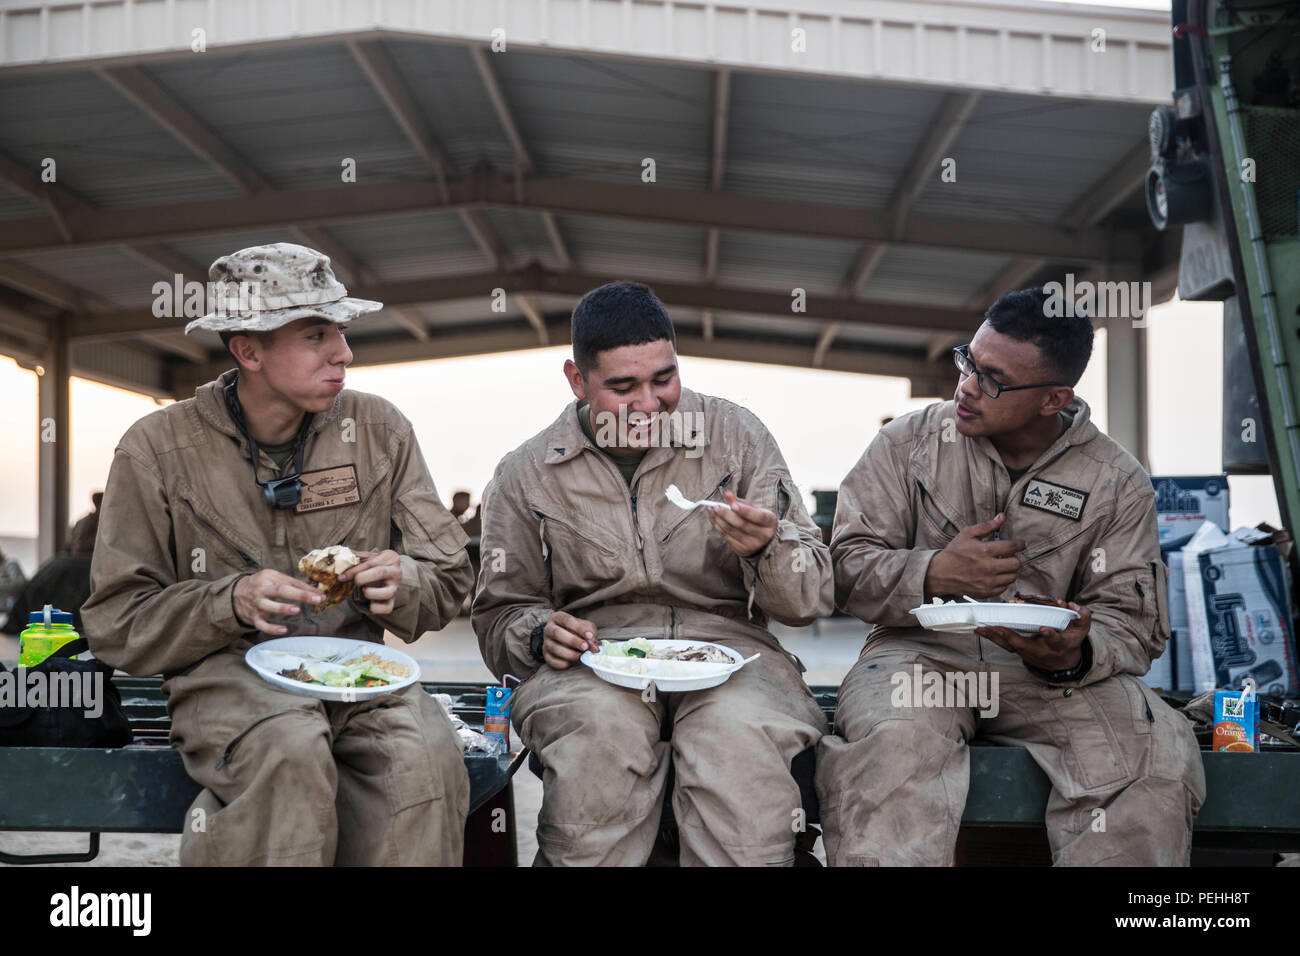 KUWAIT (Aug. 18, 2015) U.S. Marine Lance Cpl. Alejandro Chavarria (left), Lance Cpl. David Medina and Lance Cpl. Anthony Cabrera enjoy a hot meal in the field after a live-fire and maneuver exercise. Chavarria, Medina, and Cabrera are all crewmen with Kilo Company, Battalion Landing Team 3rd Battalion, 1st Marine Regiment, 15th Marine Expeditionary Unit (MEU). During the training, Marines with Combat Logistics Battalion 15, 15th MEU, delivered hot meals to the Marines in the training areas. Elements of the 15th MEU are ashore in Kuwait for sustainment training to maintain and enhance the skill Stock Photo